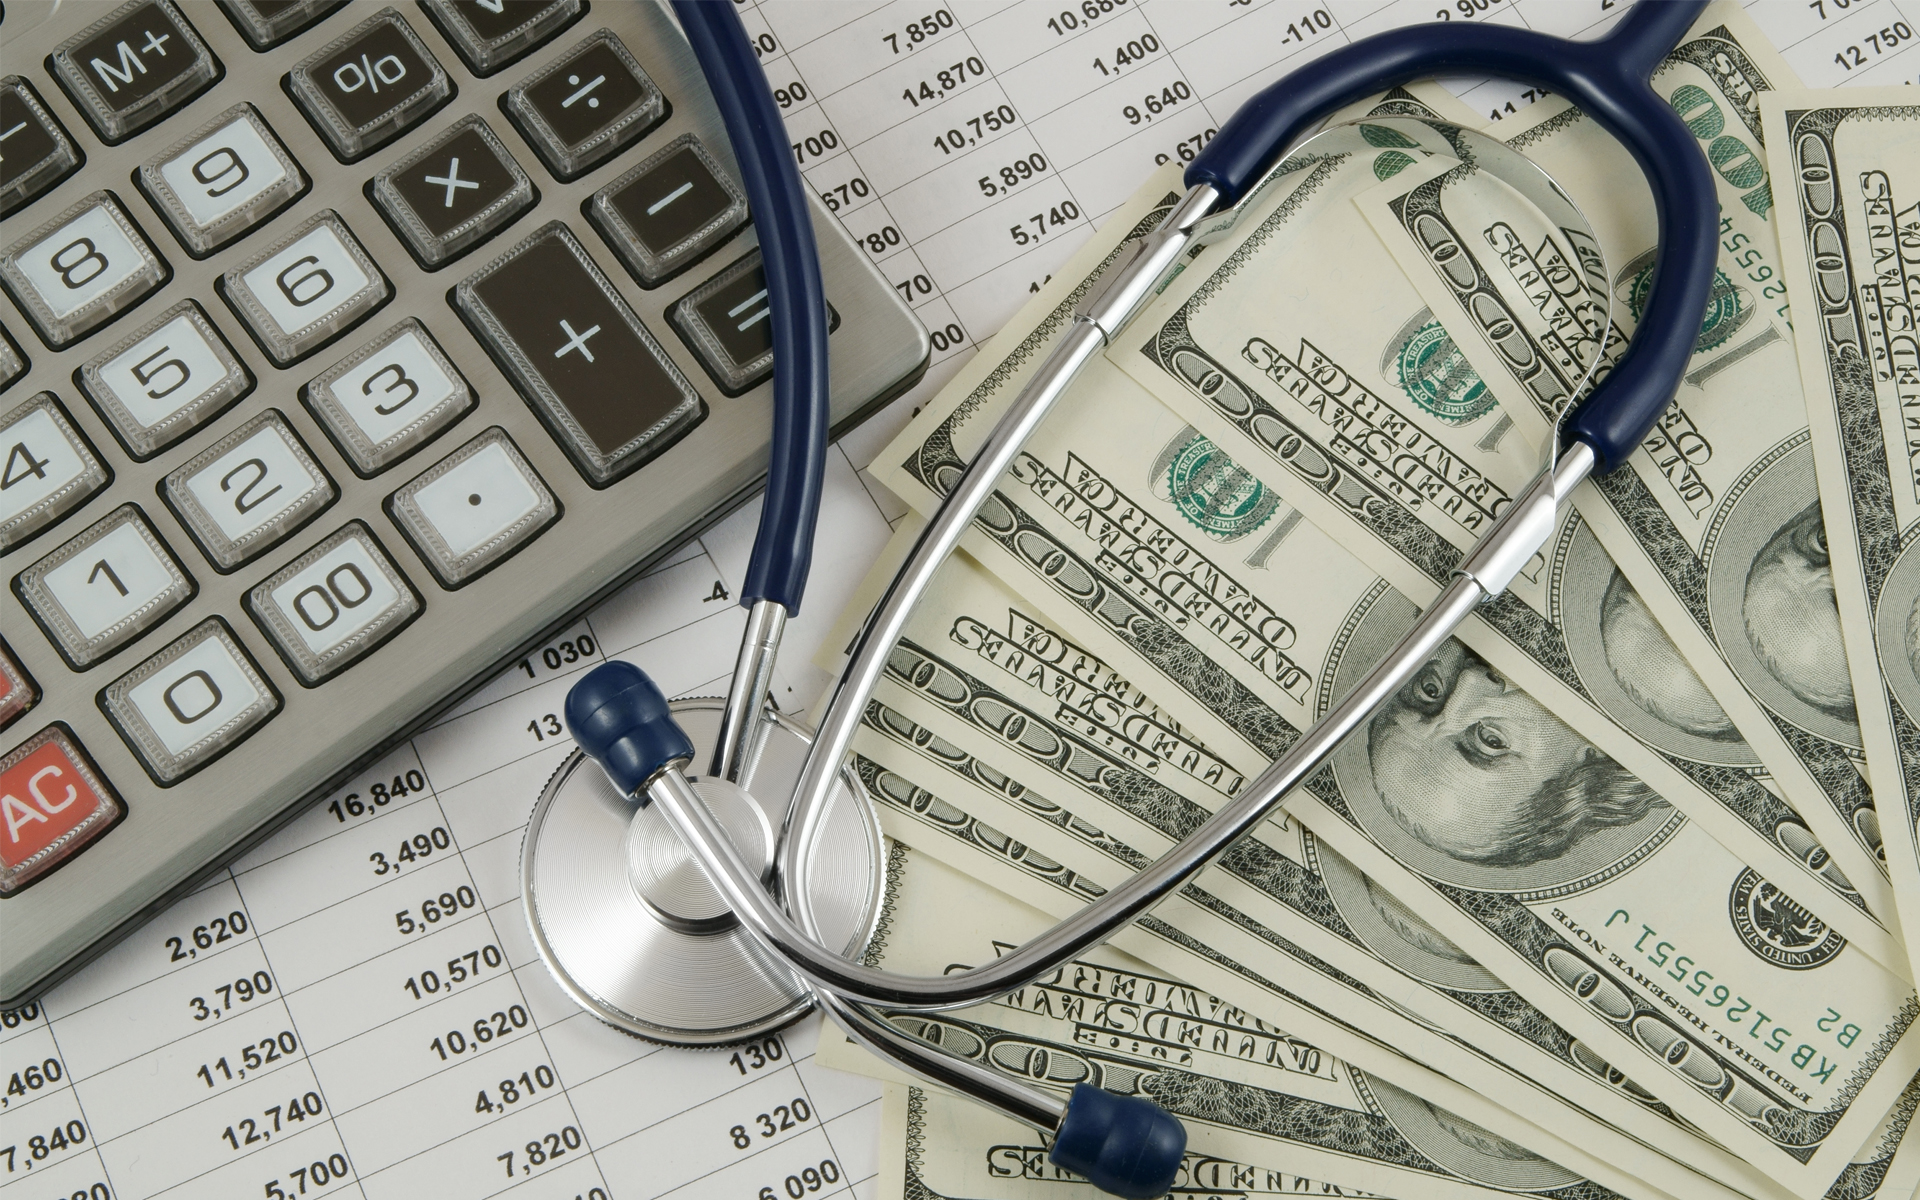 Image for The High Price of Health Insurance How to Find Affordable Coverage. A decorative image of a closeup of medical bills with a calculator, stethoscope, and several hundred dollar bills.